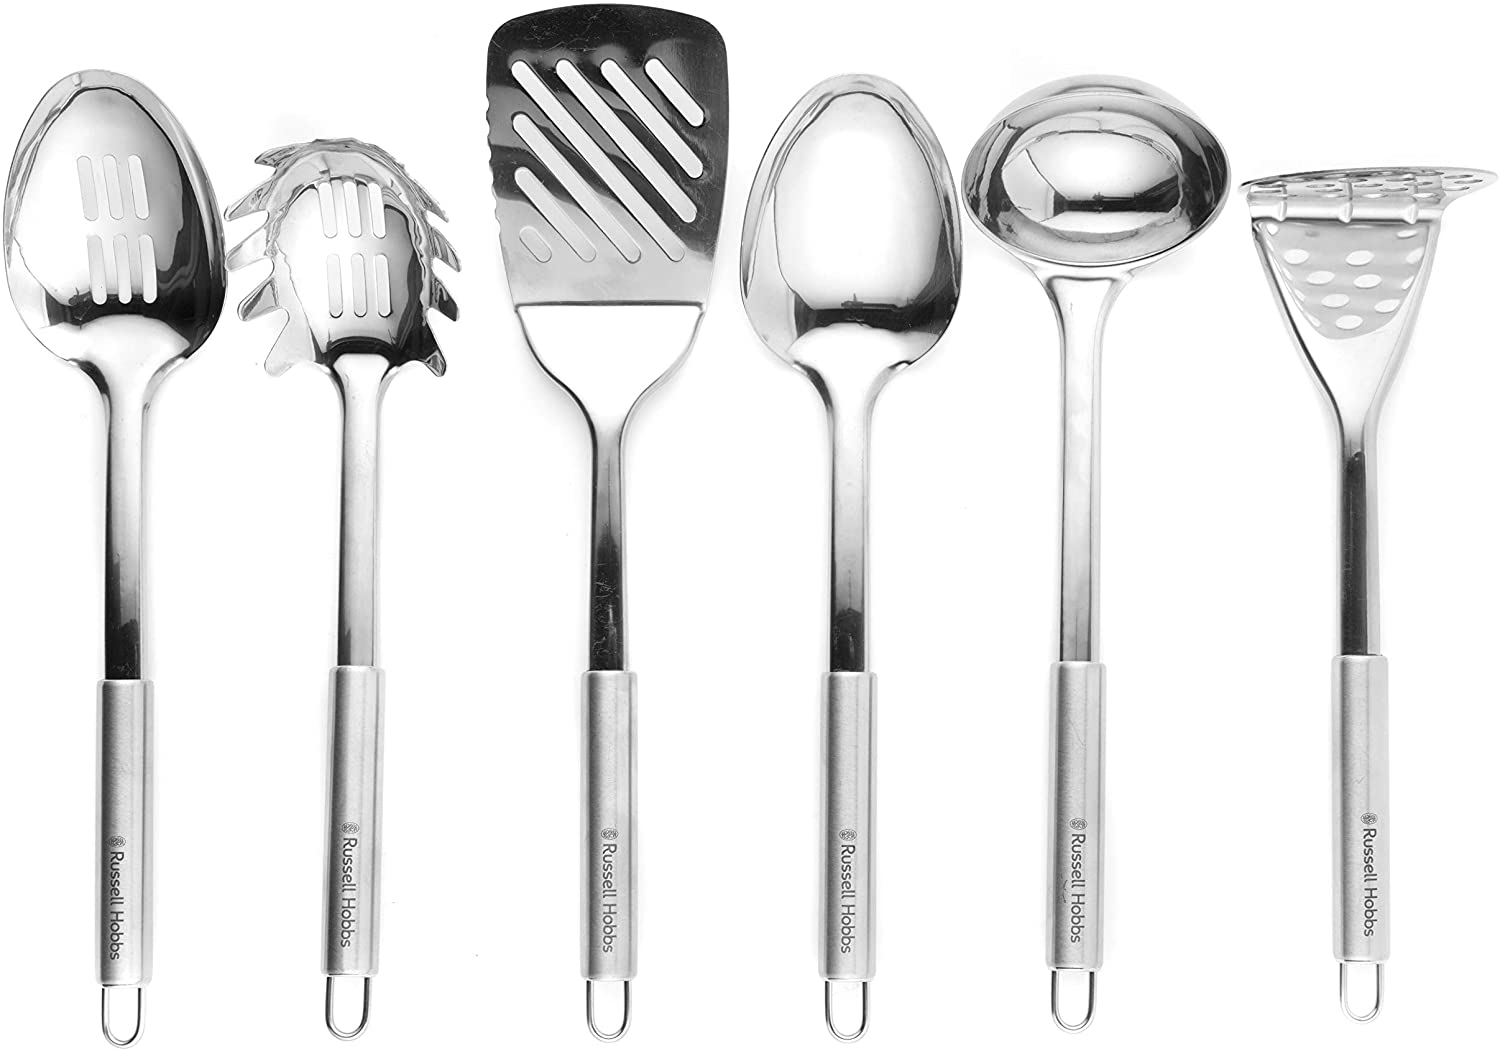 Russell Hobbs RH00123 Stainless Steel Kitchen Utensil Set/Cooking Utensils, Silver, Turner, Ladle, Mesh and Pasta Server with Fixed and Slotted Spoon, Stainless Steel